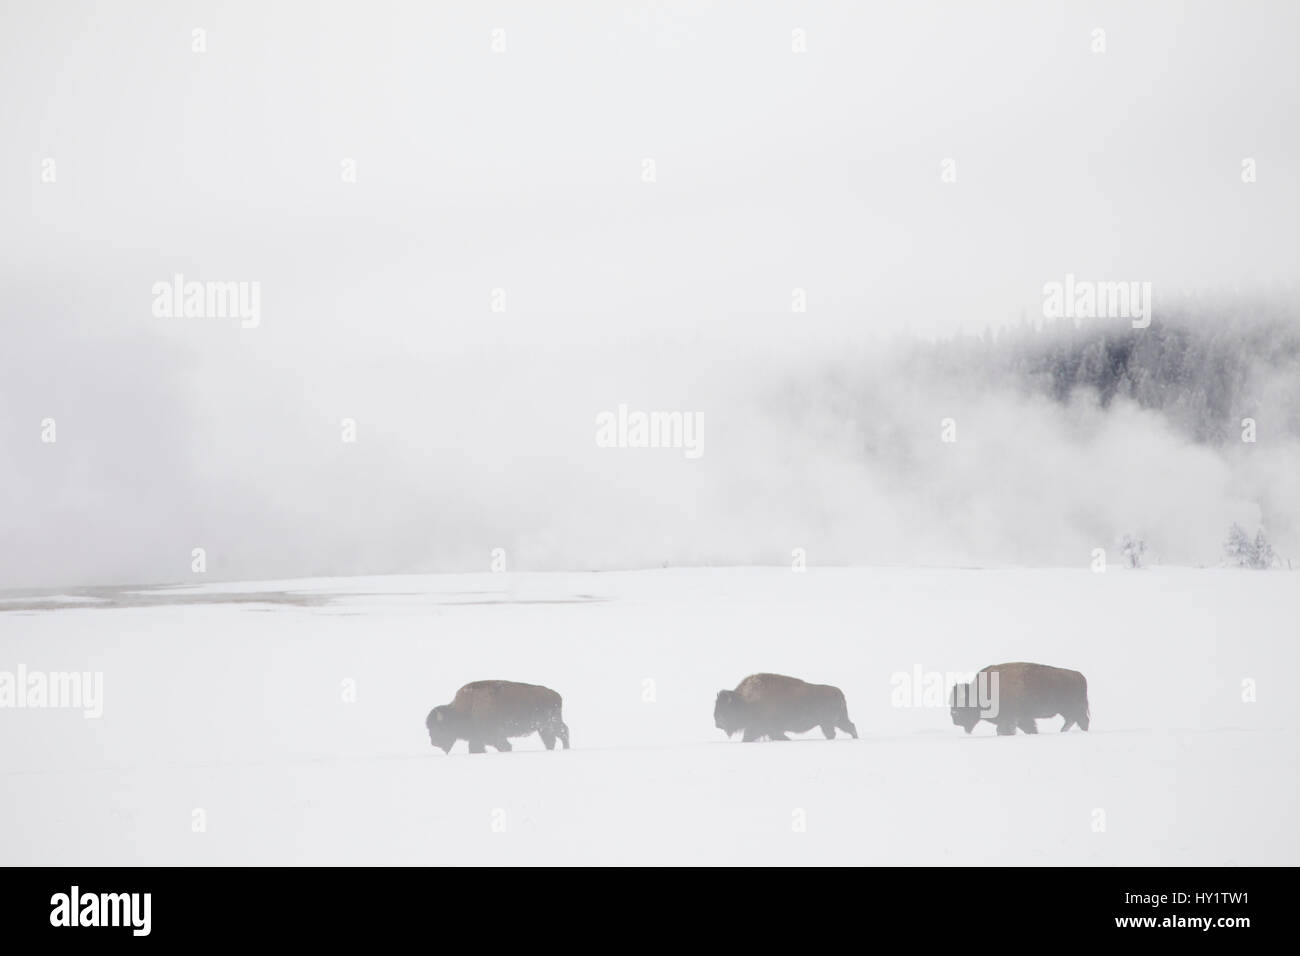 Procession of Bison (Bison bison) in front of geysers in winter, Yellowstone National Park, Wyoming, USA, February 2013. Stock Photo